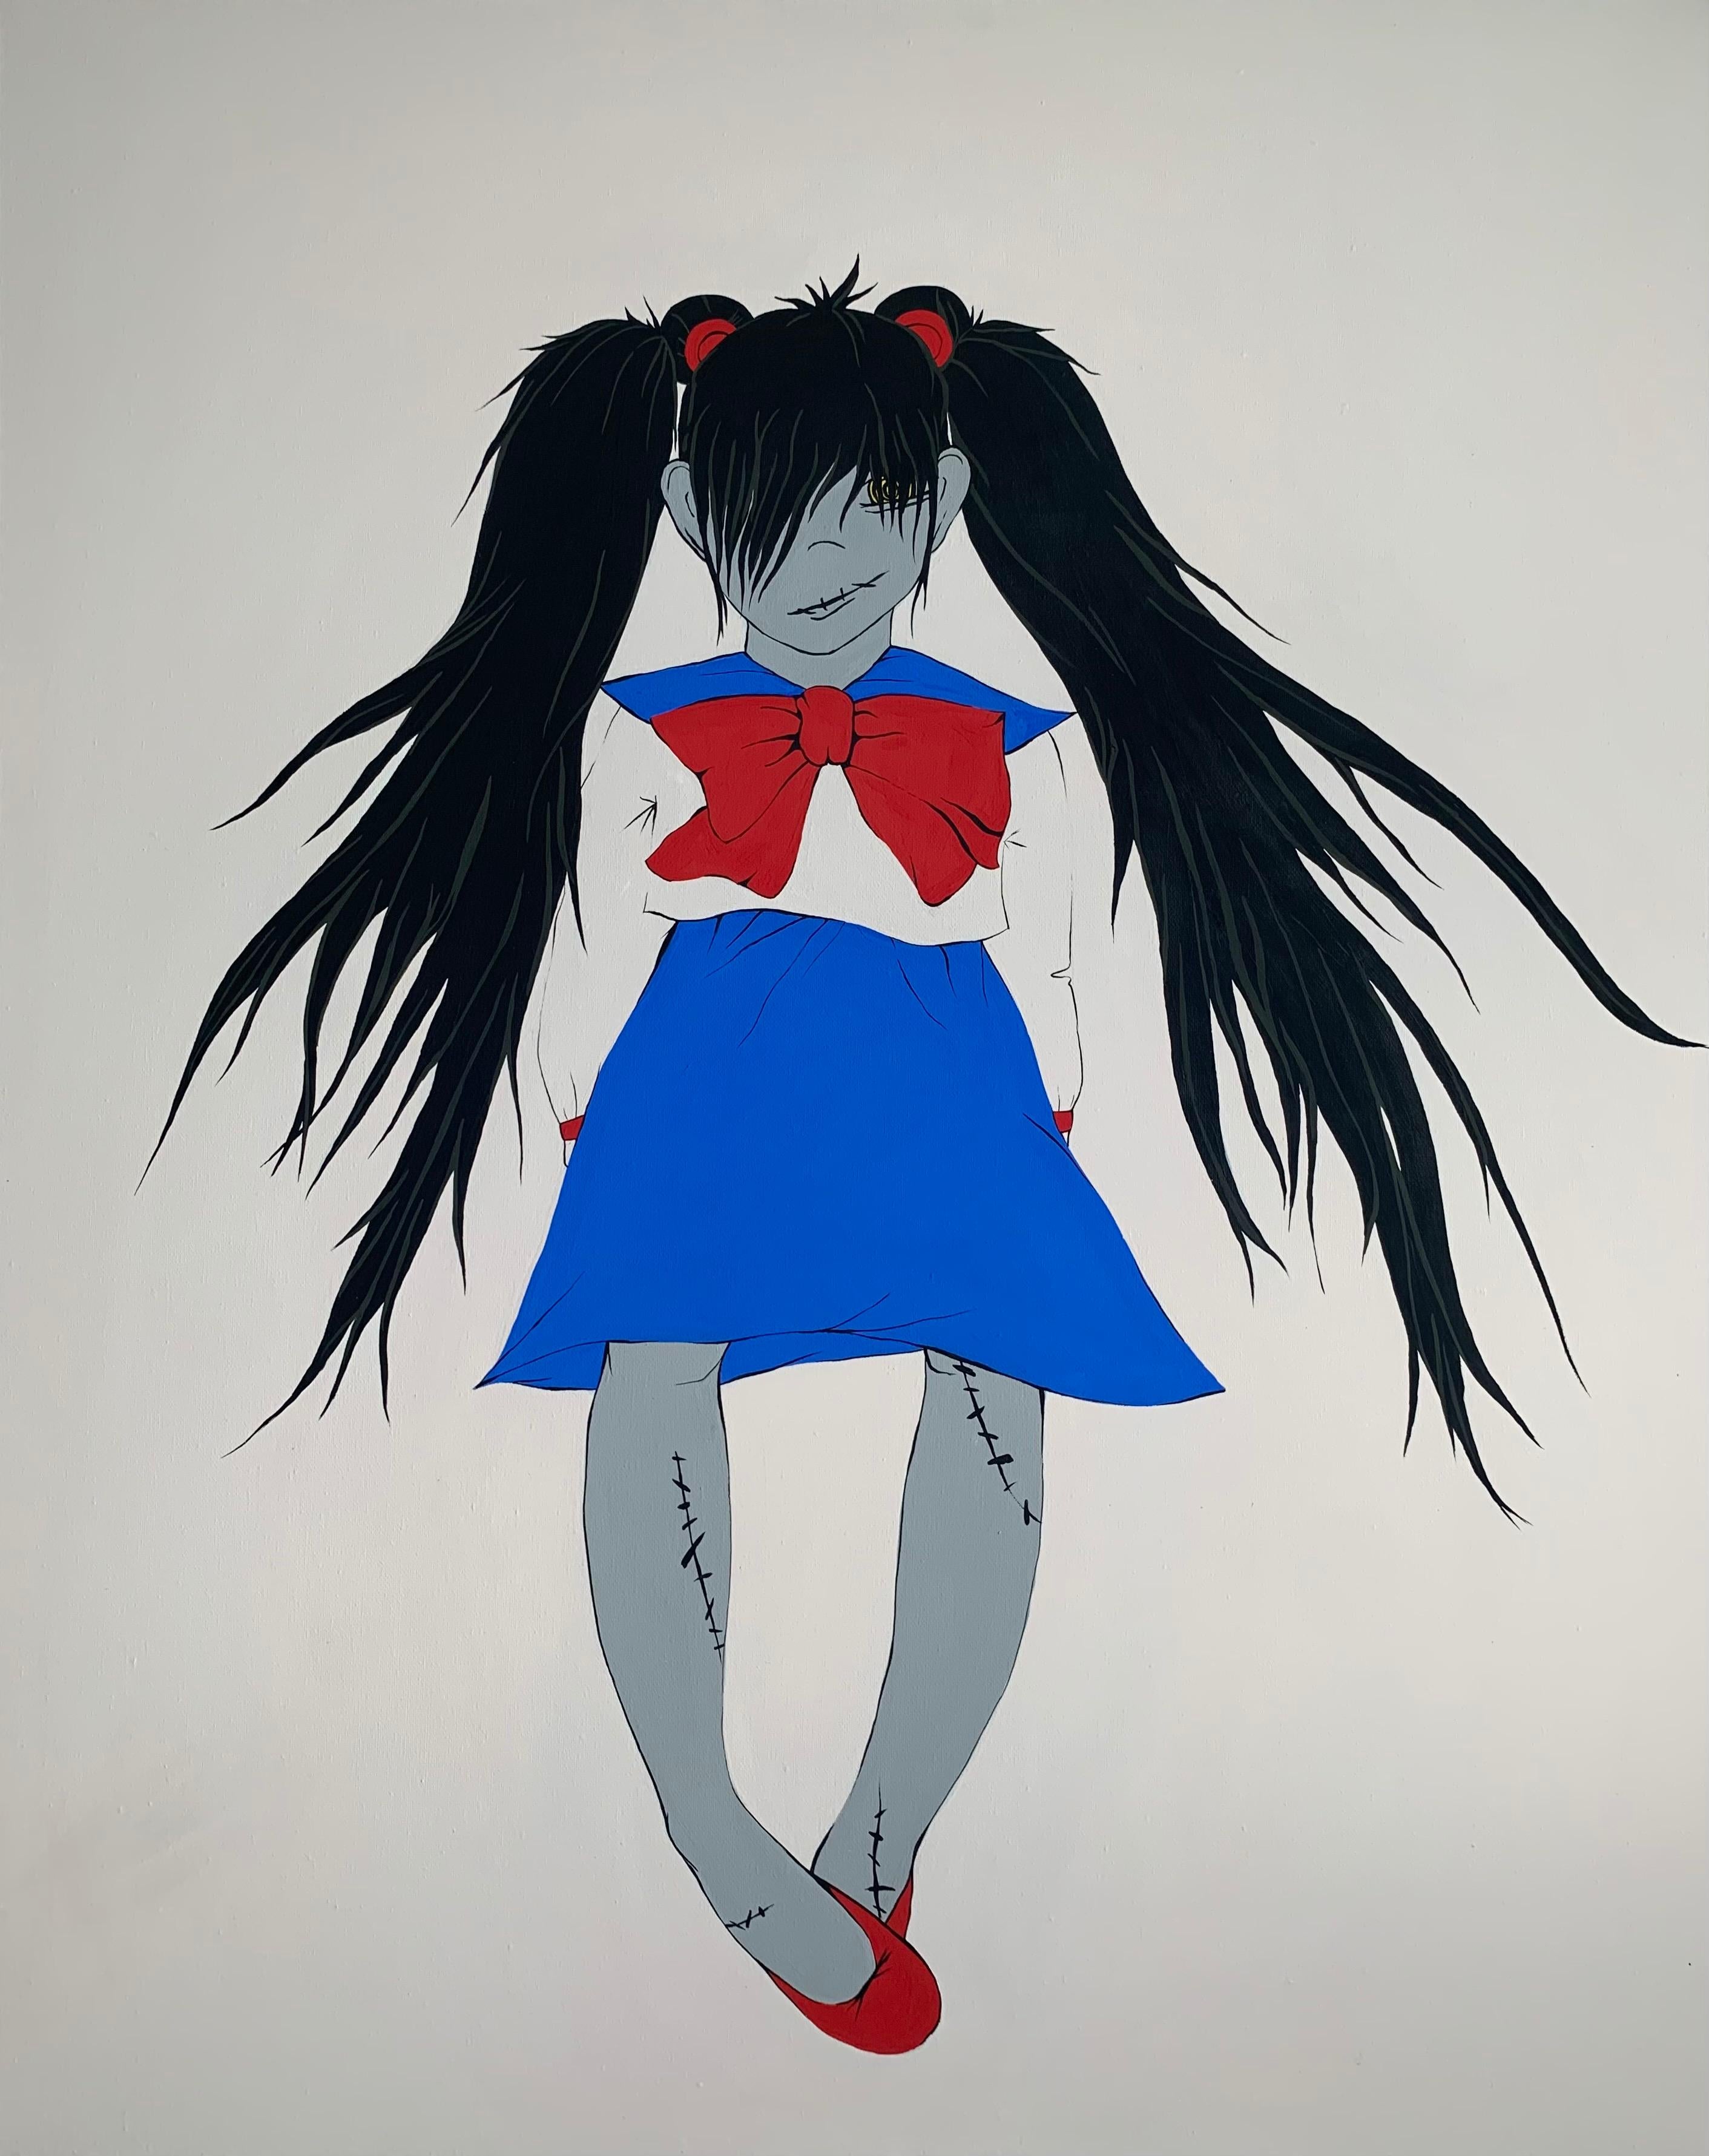 Zombie girl fan of Sailor Moon 100x80cm - Painting by Zombie Girl 